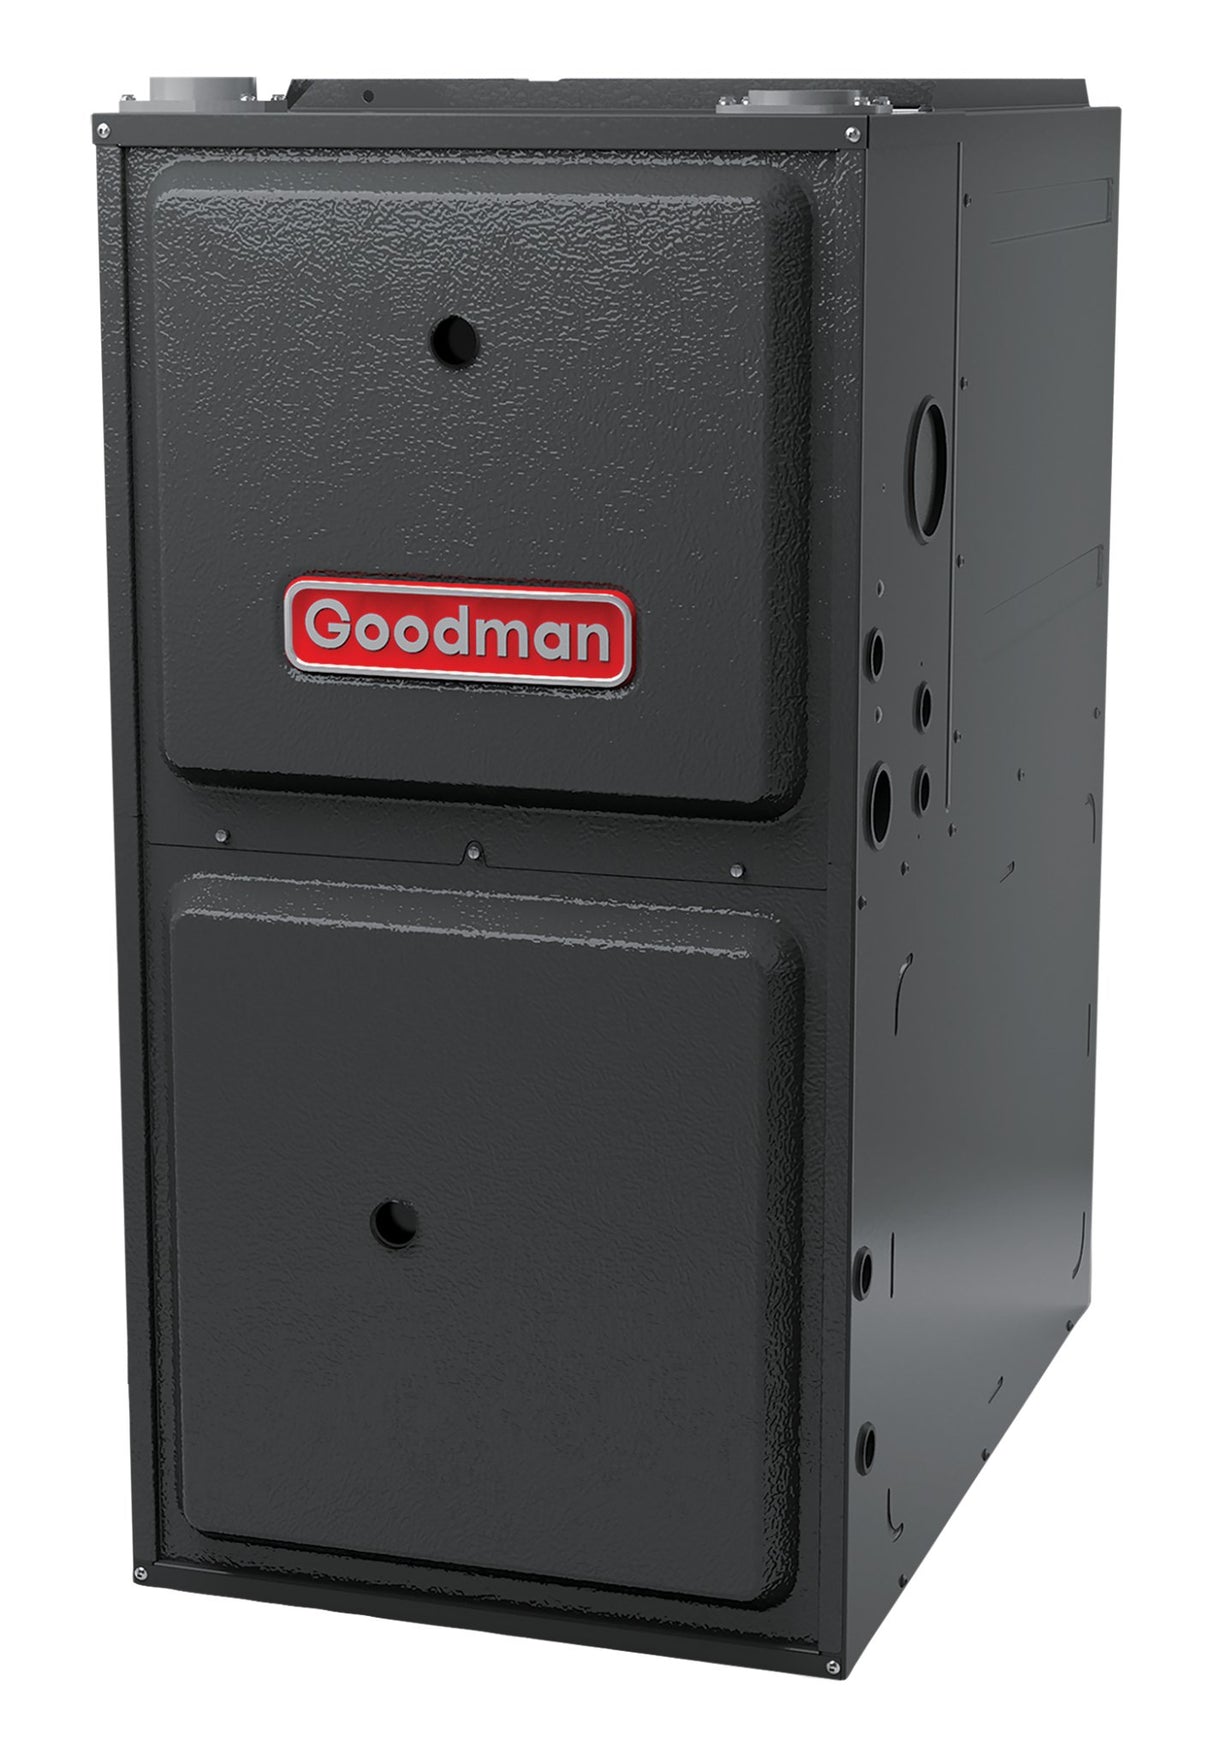 Goodman 5.0 Ton 80% gas furnace nine speed ecm two stage GM9C801205DN - AC units for less